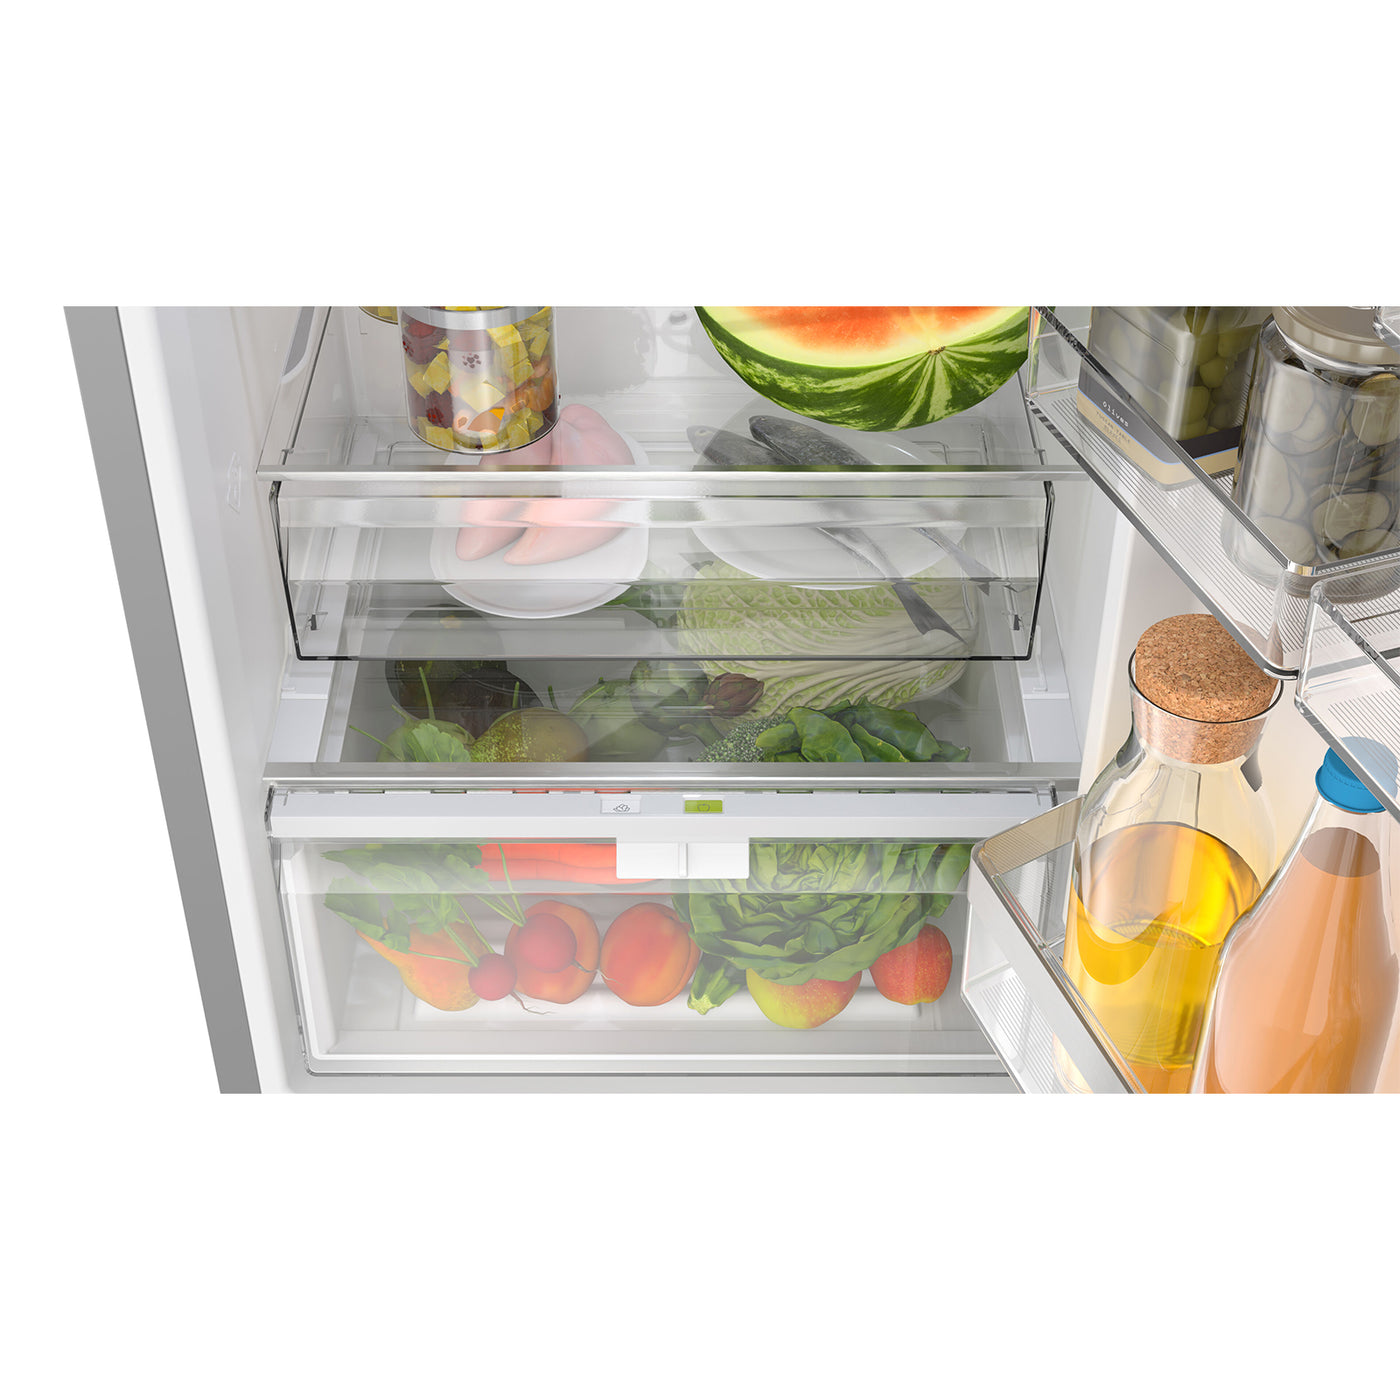 Bosch 24" Stainless Steel Smart Counter-depth Bottom Freezer Refrigerator with Home Connect (12.8 Cu. Ft) - B24CB50ESS